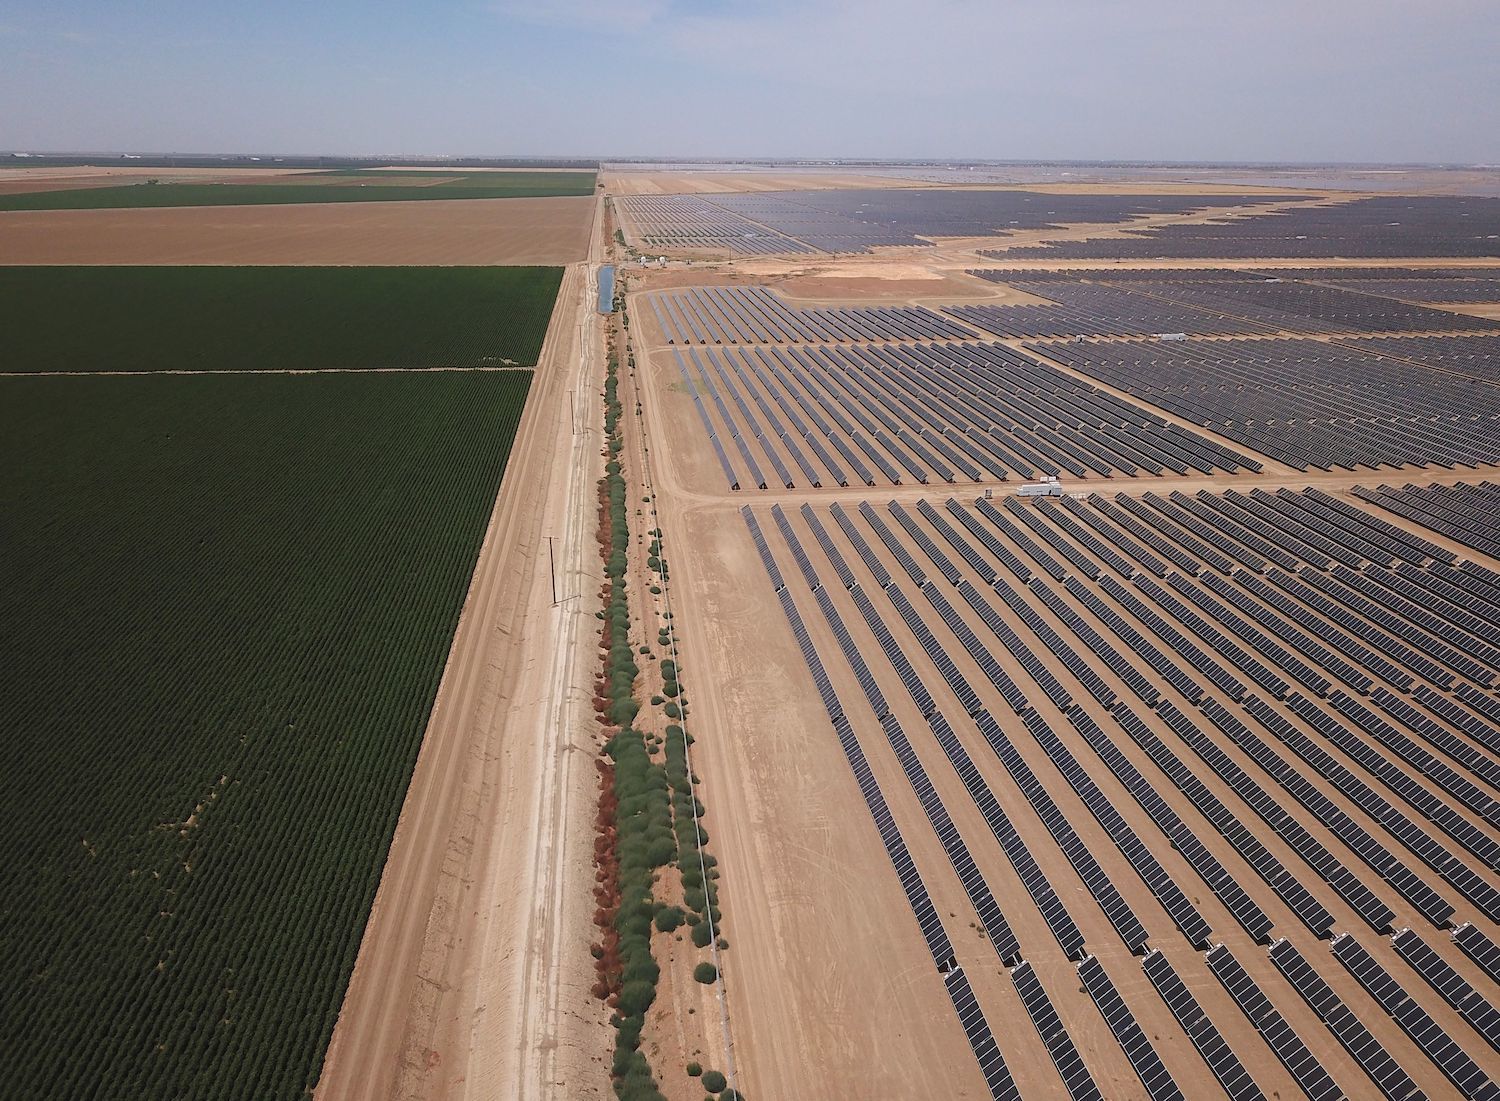 A solar panel range is seen in what was once a field used for agriculture, in California's drought-stricken Central Valley near Huron, California, on July 23, 2021.